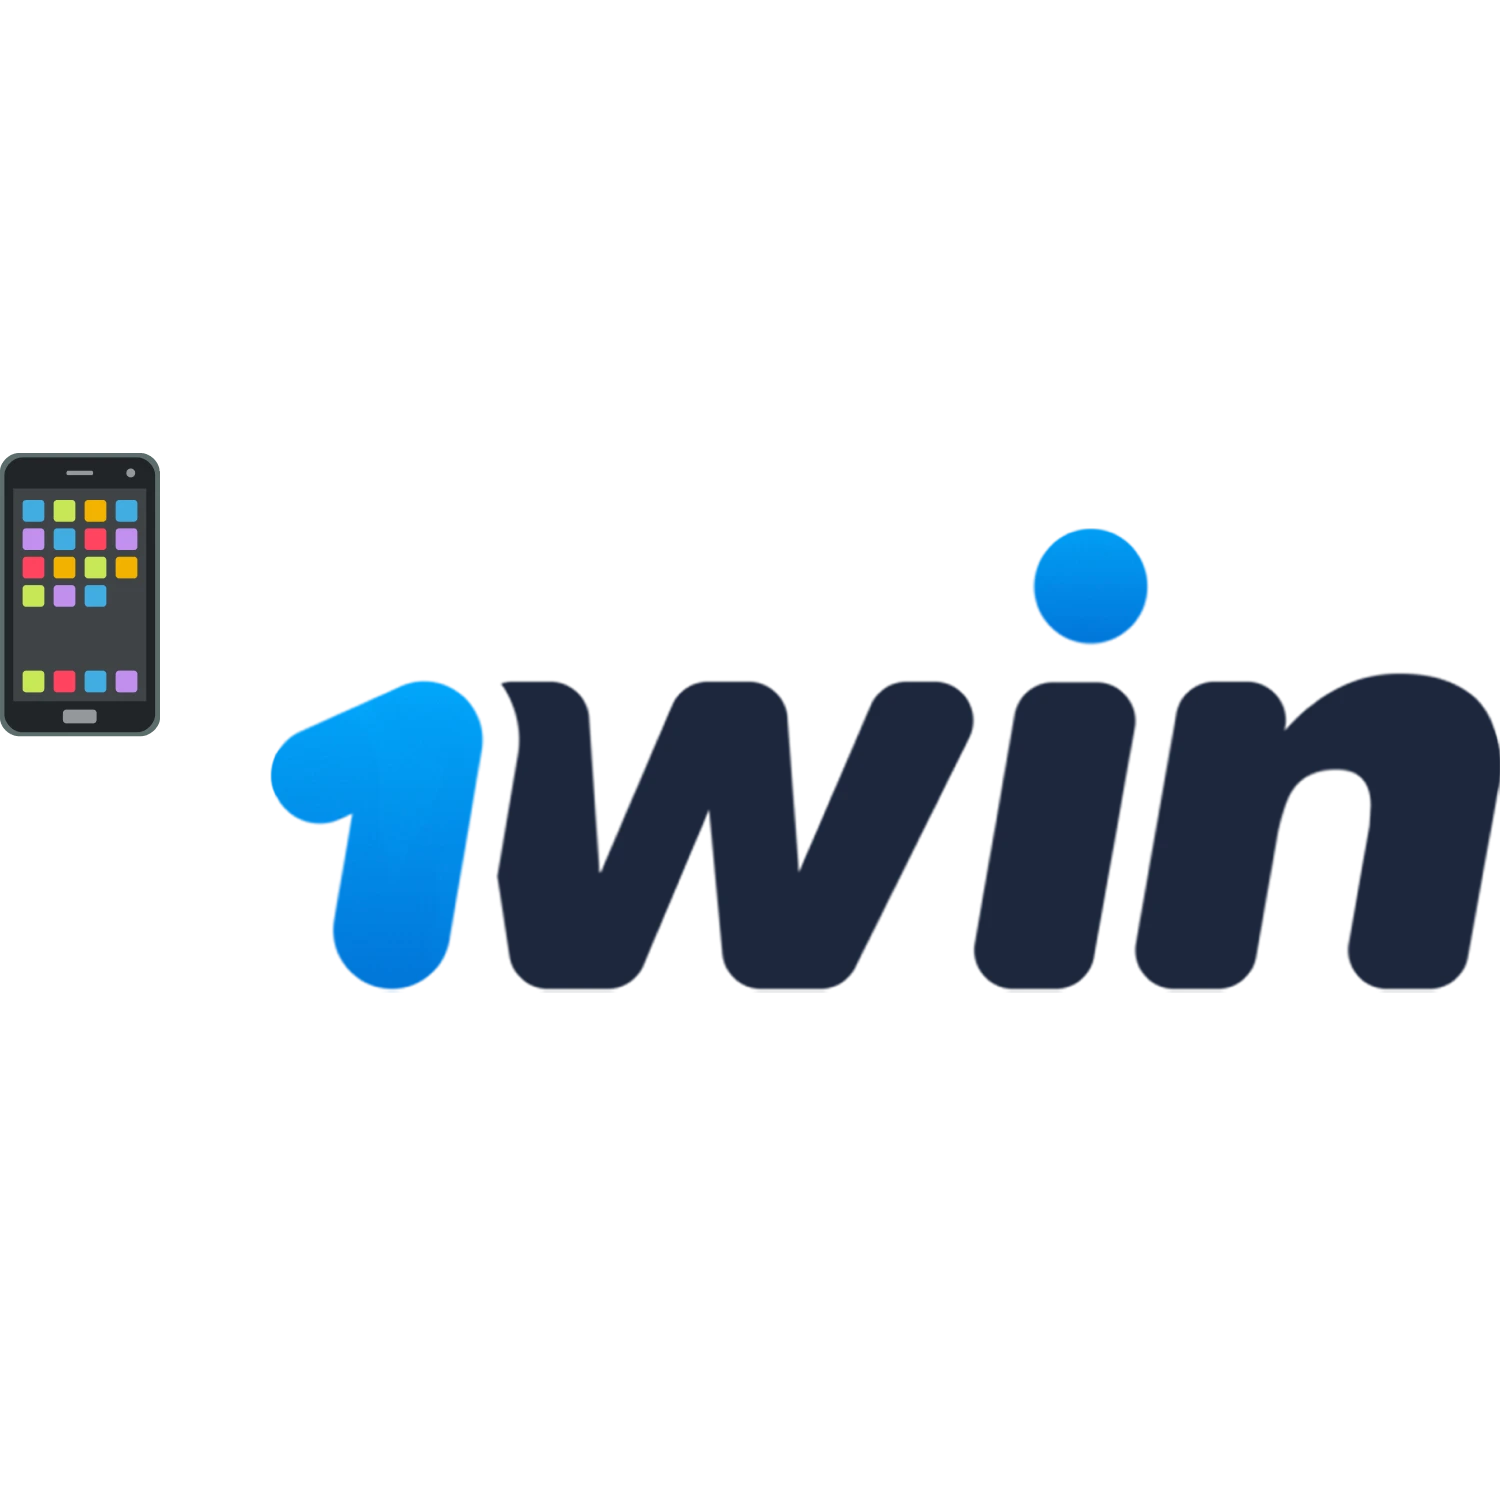 1win has a great betting and gambling app for Android and iOS devices.